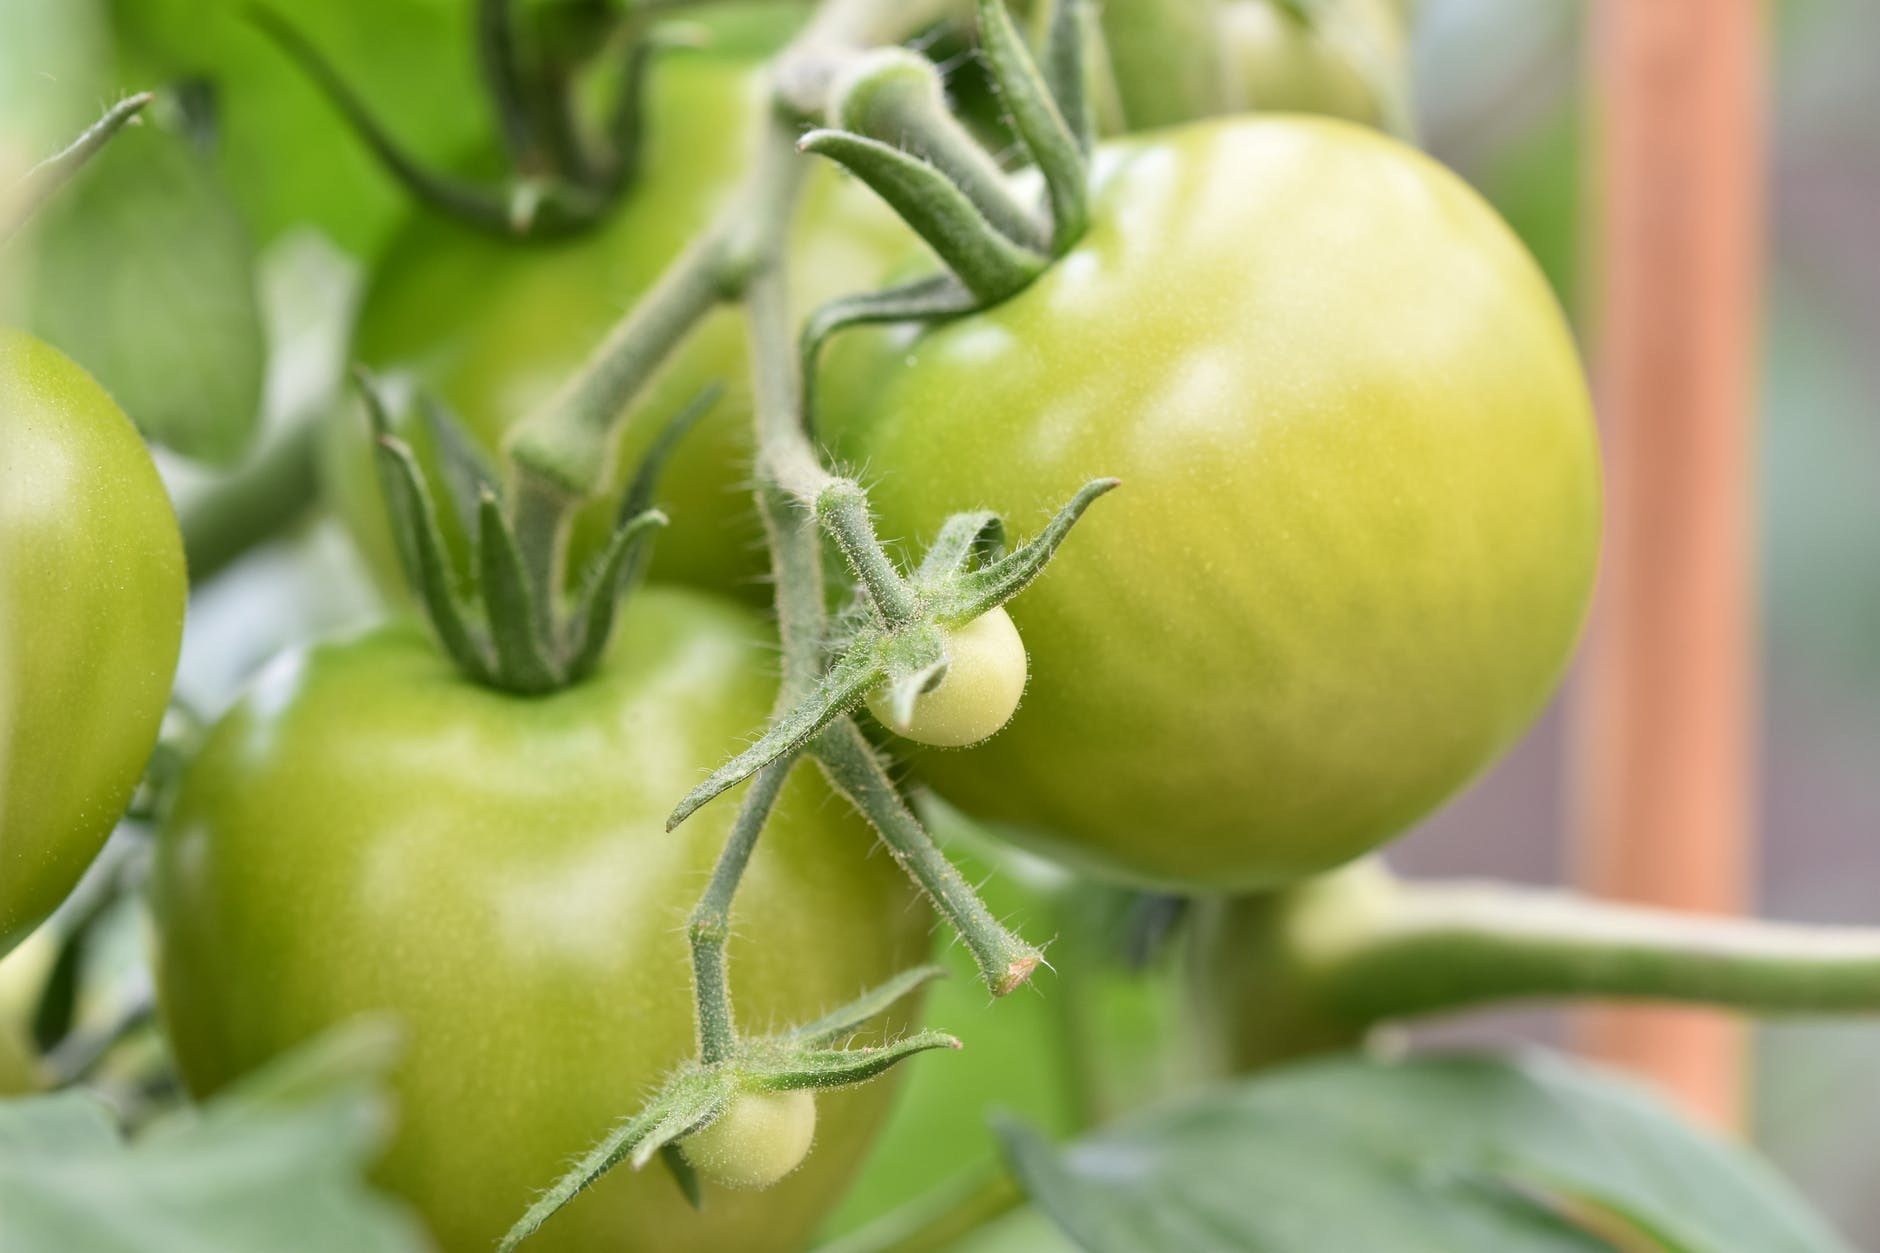 green tomatoes in close up photography